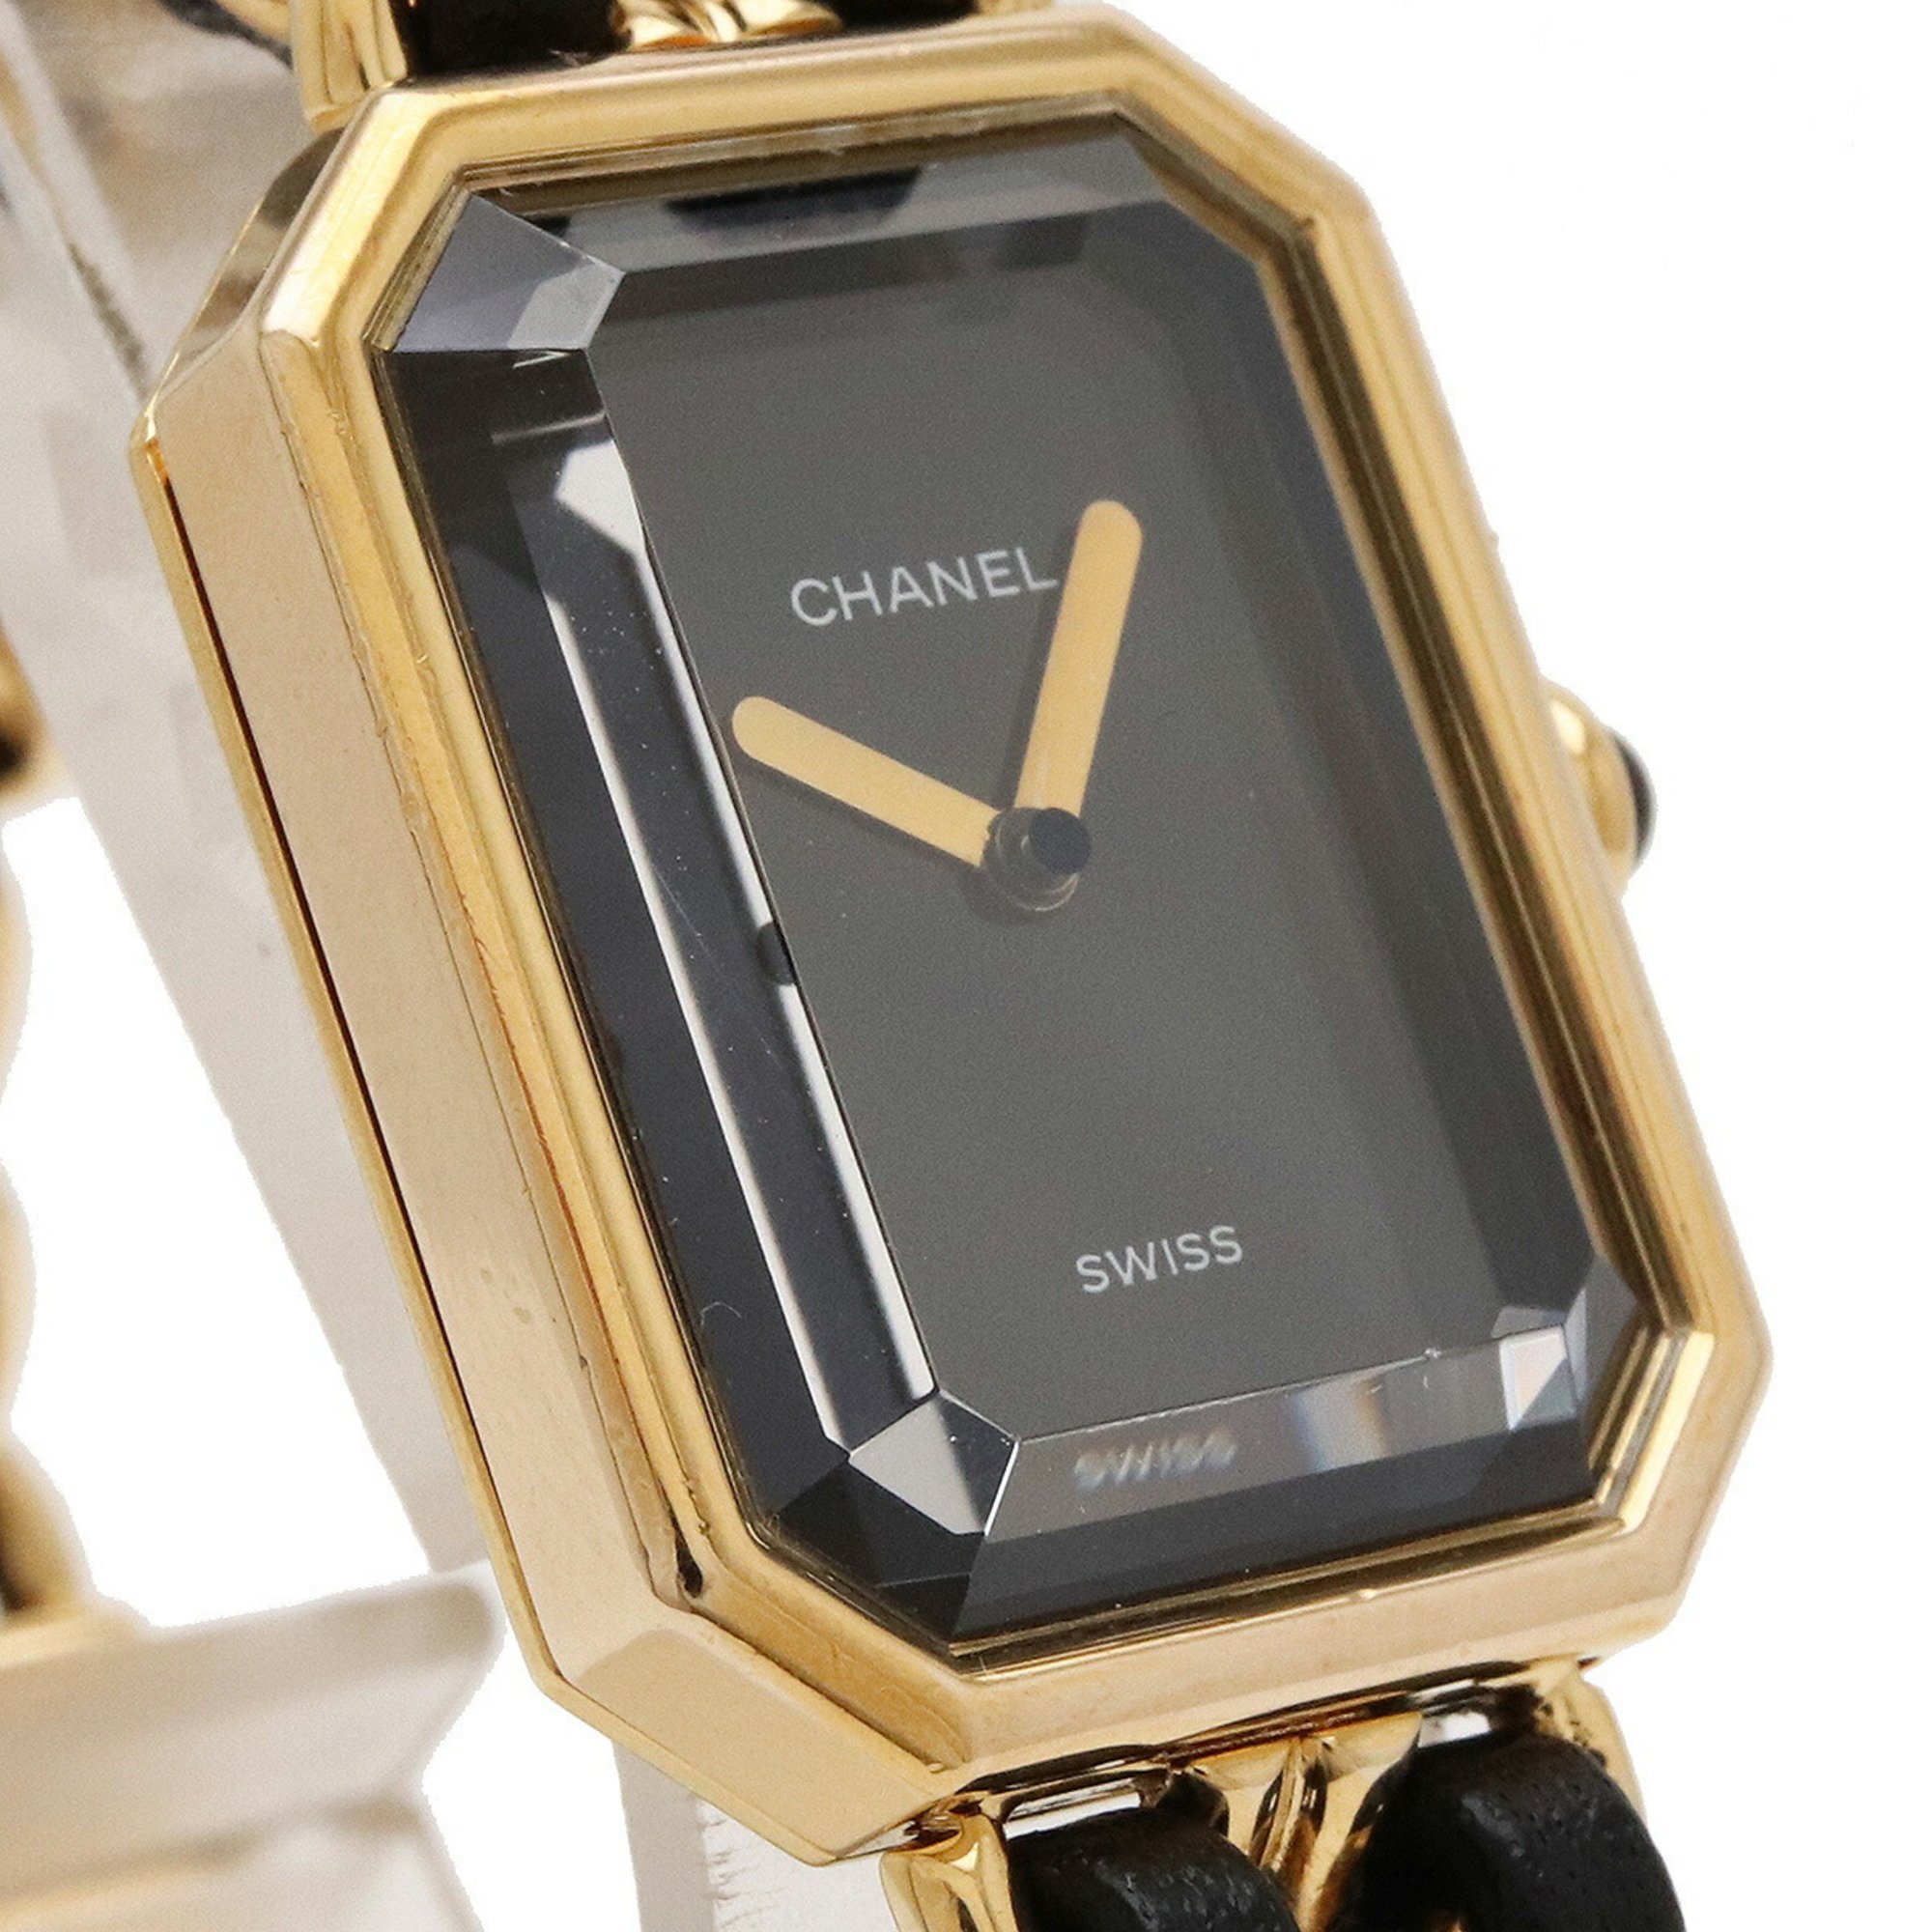 CHANEL Premiere S size GP leather ladies watch gold H0001